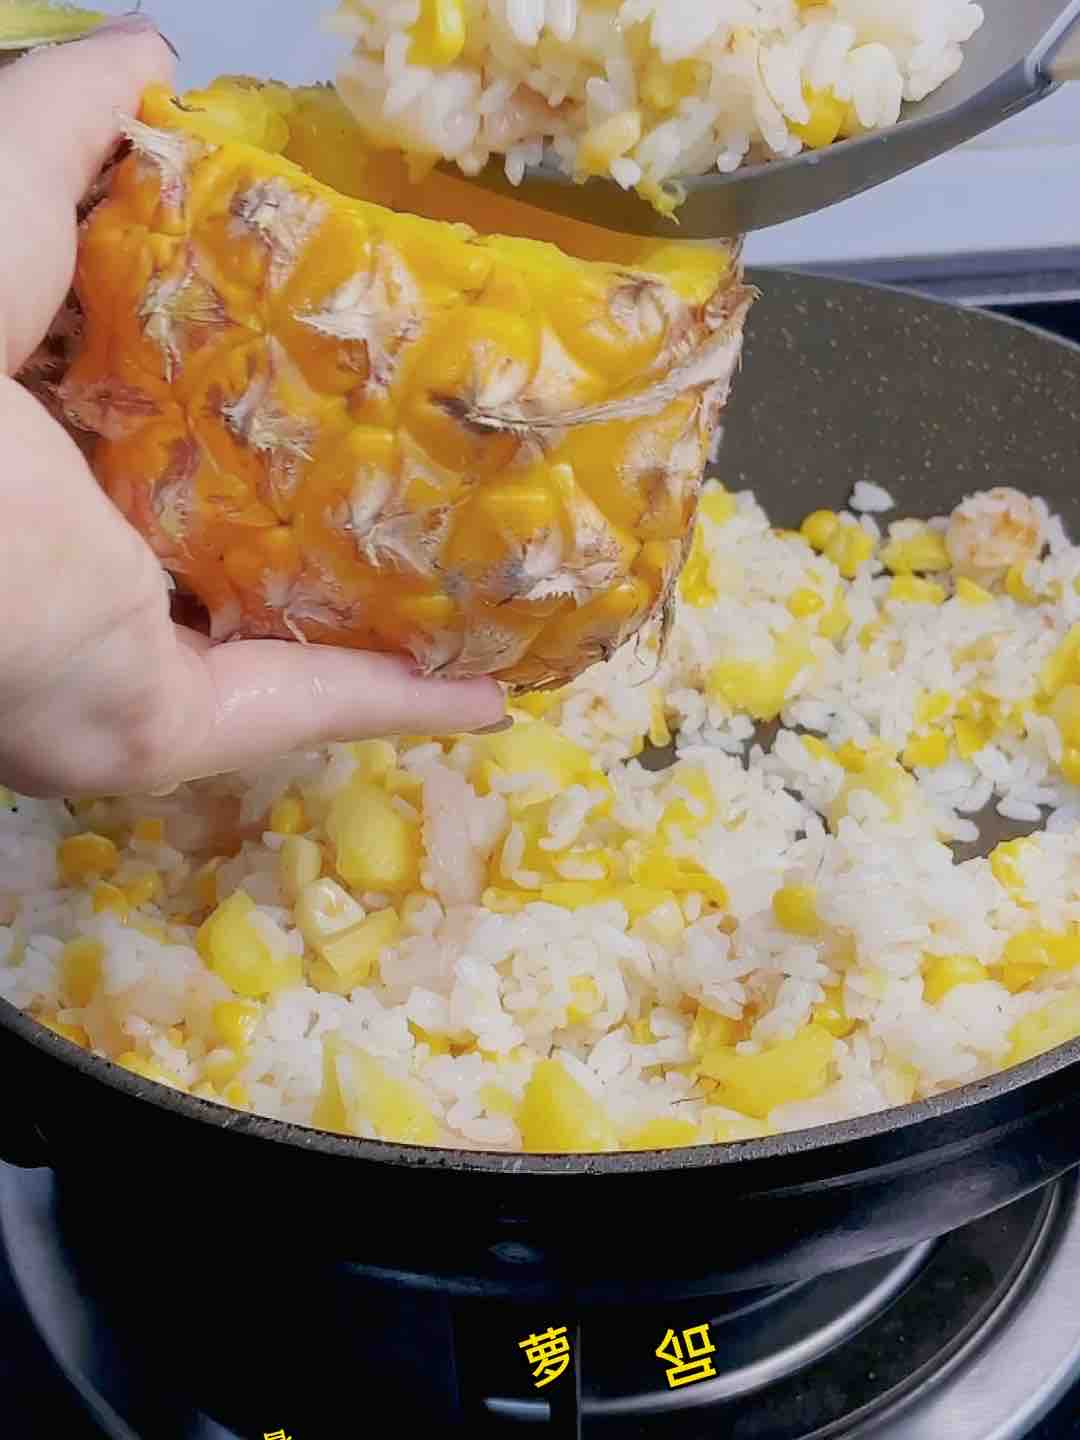 Stunning Pineapple and Shrimp Fried Rice ❗️❗️ Appetizing and Happy recipe